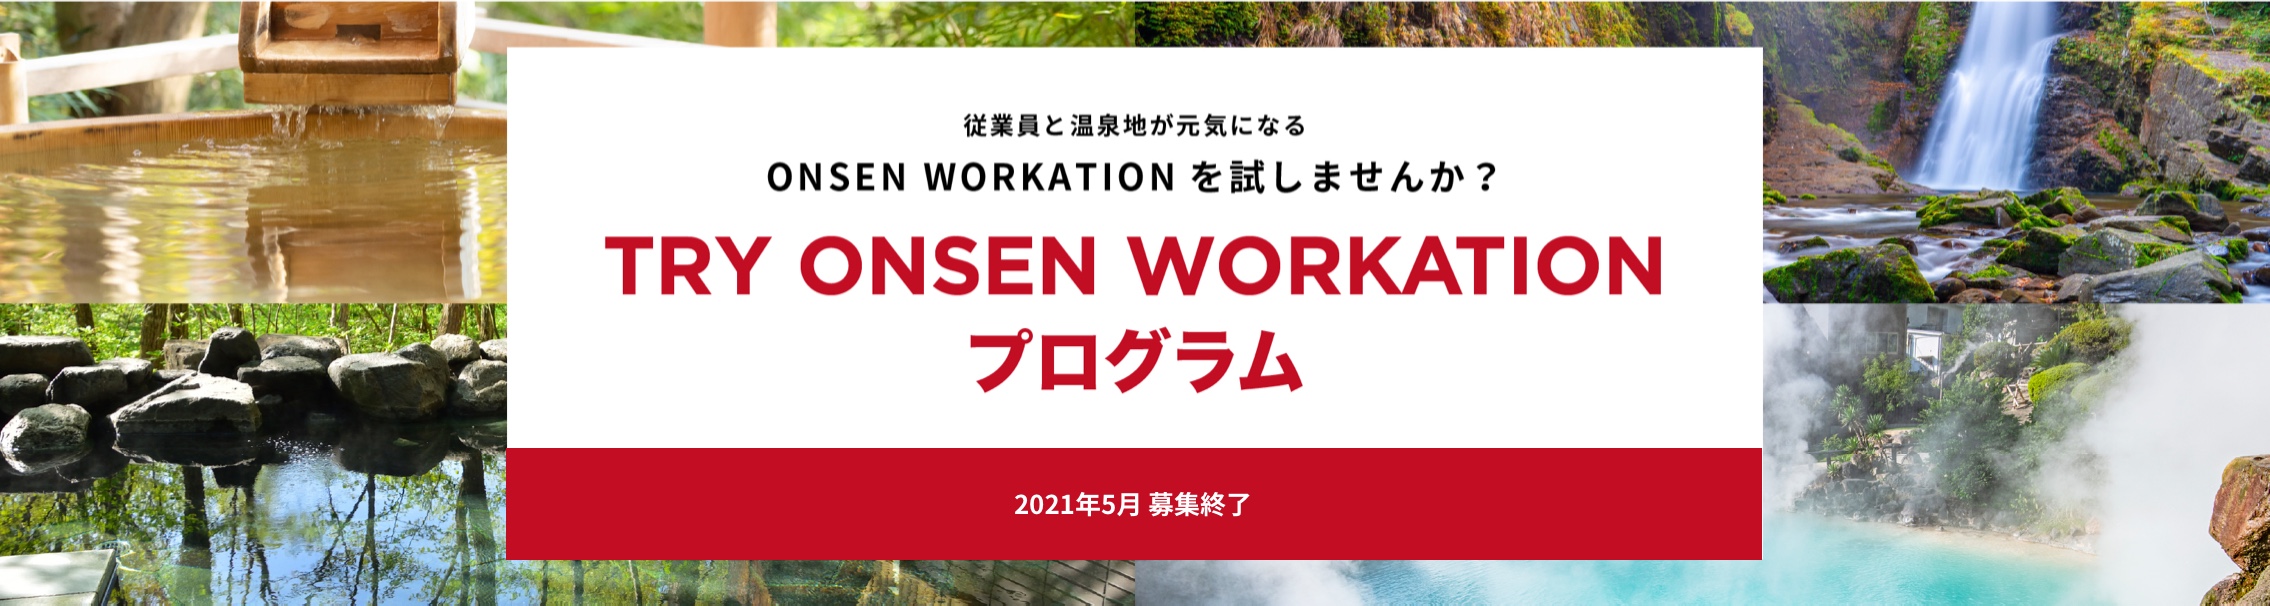 TRY ONSEN WORKATION プログラム